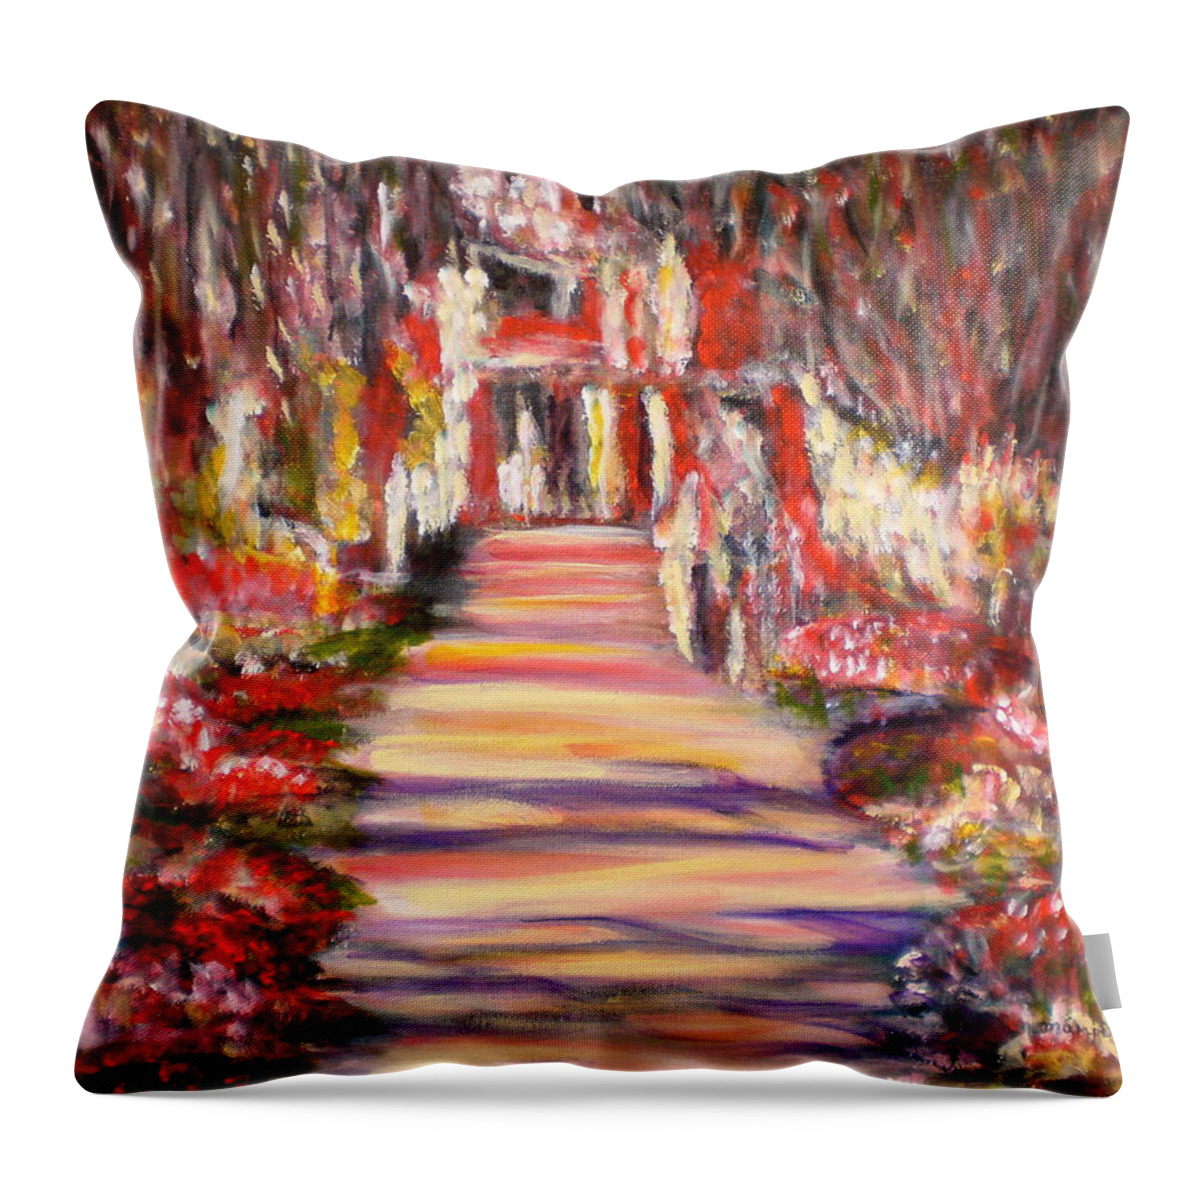 Garden Impressionist Red Yellow Blue Pink Flowers Romantic Reflections Landscape Monet Black Throw Pillow featuring the painting Majestic Garden by Manjiri Kanvinde